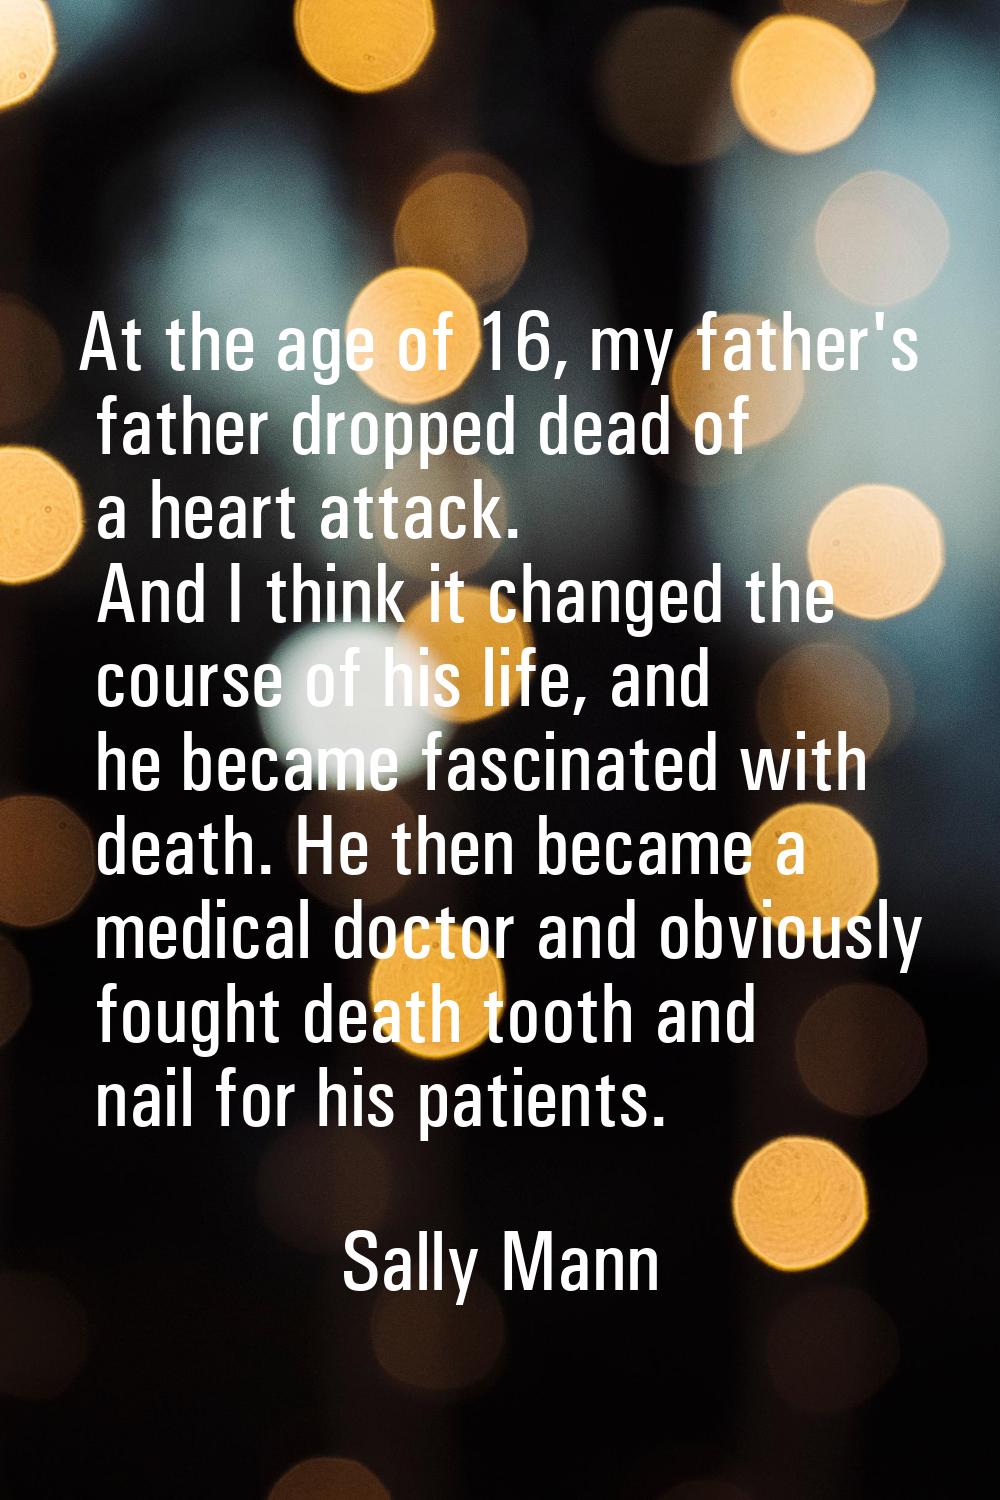 At the age of 16, my father's father dropped dead of a heart attack. And I think it changed the cou